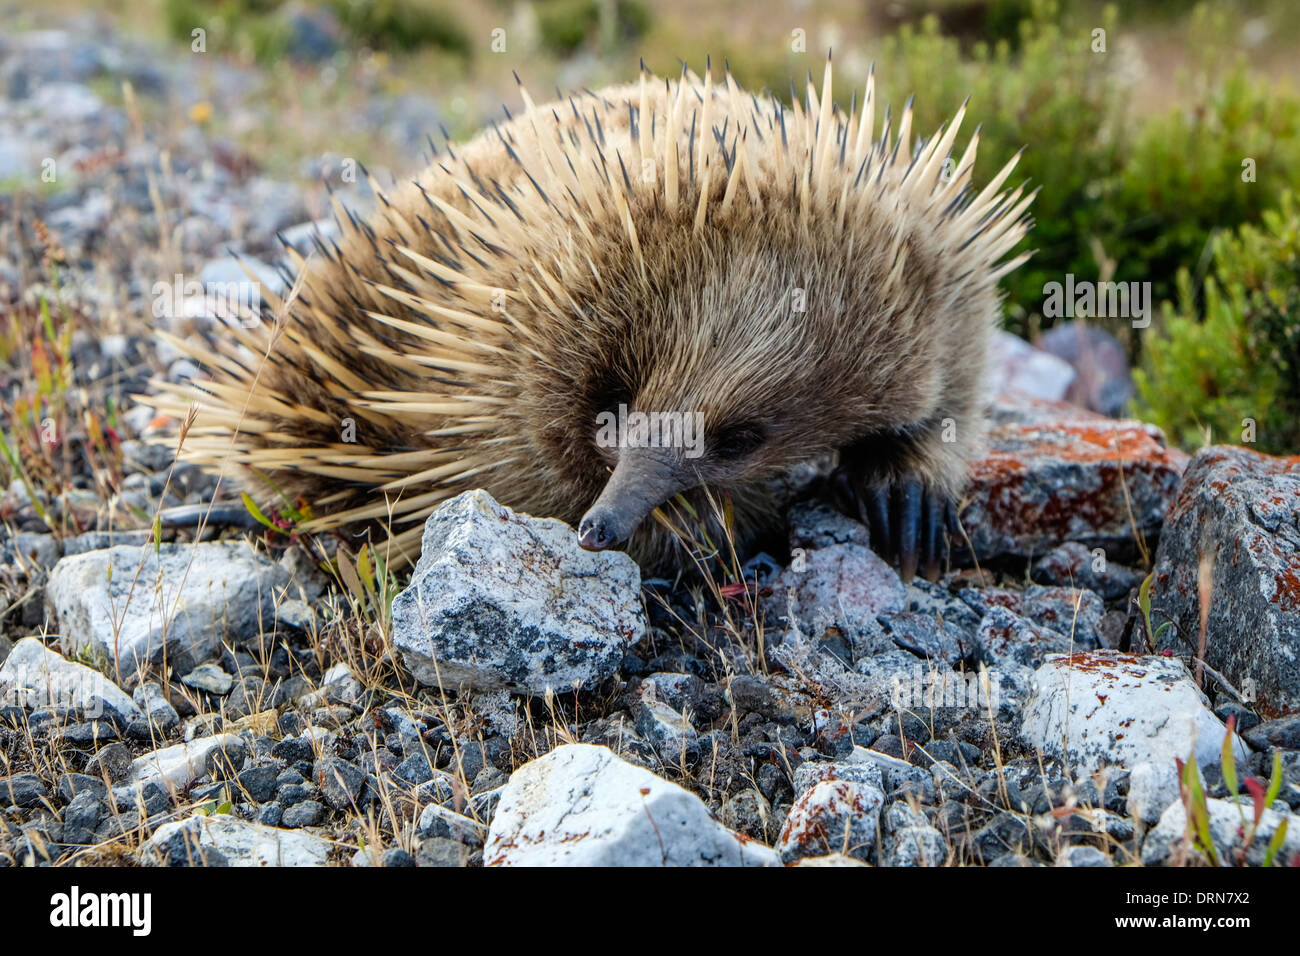 An Australian echidna, the spiny anteater foraging for insects Stock Photo